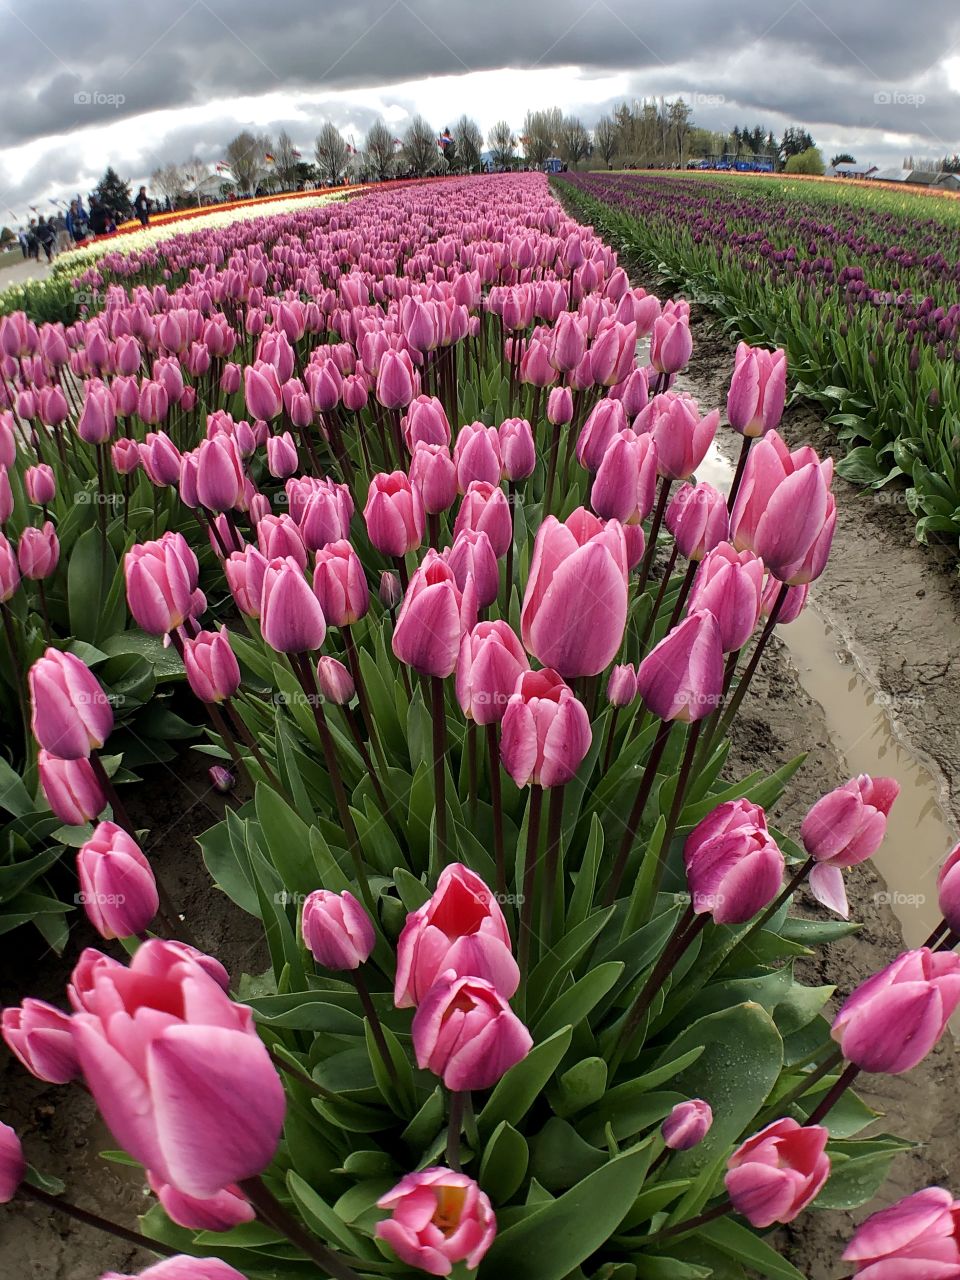 Vibrant Pink Tulips in the Mount Vernon Washing Flower Fields